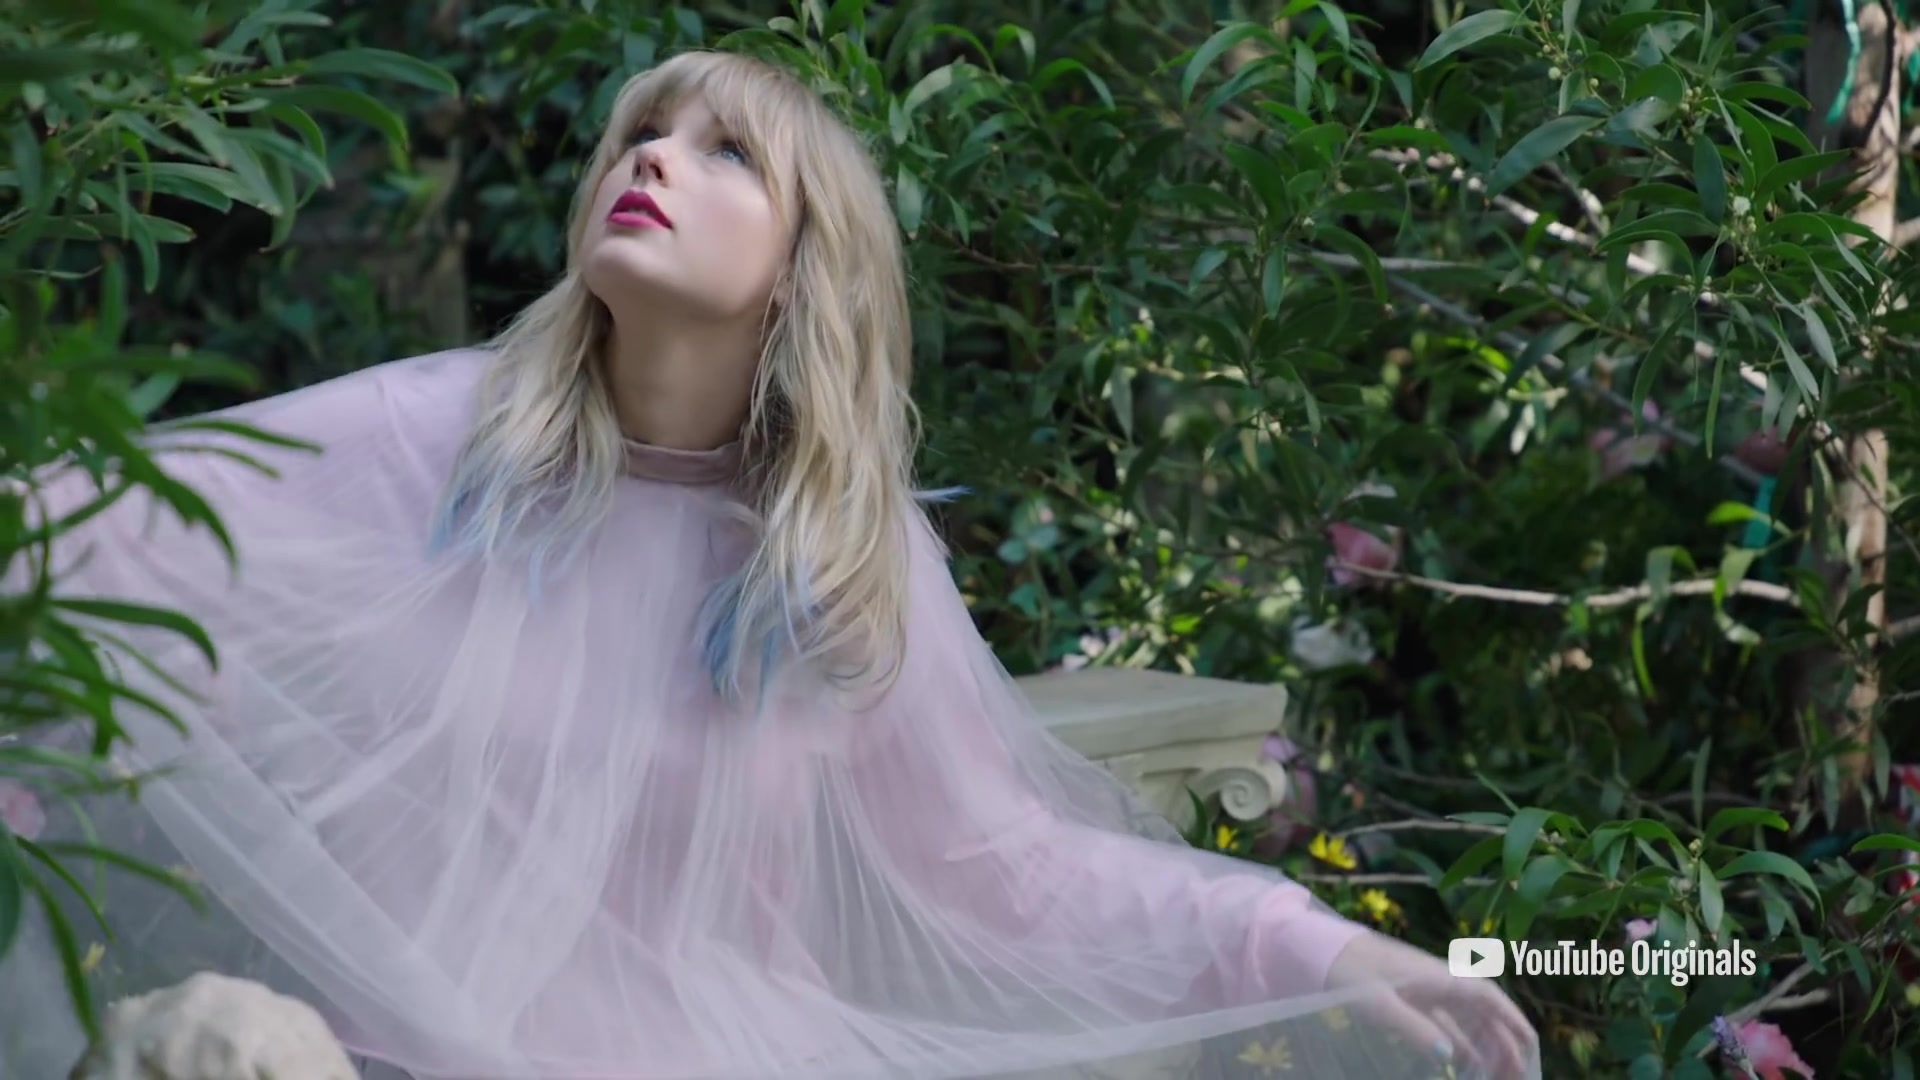 2019 Lover Album 023 Taylor Swift Web Photo Gallery Your Online Source For Taylor Swift